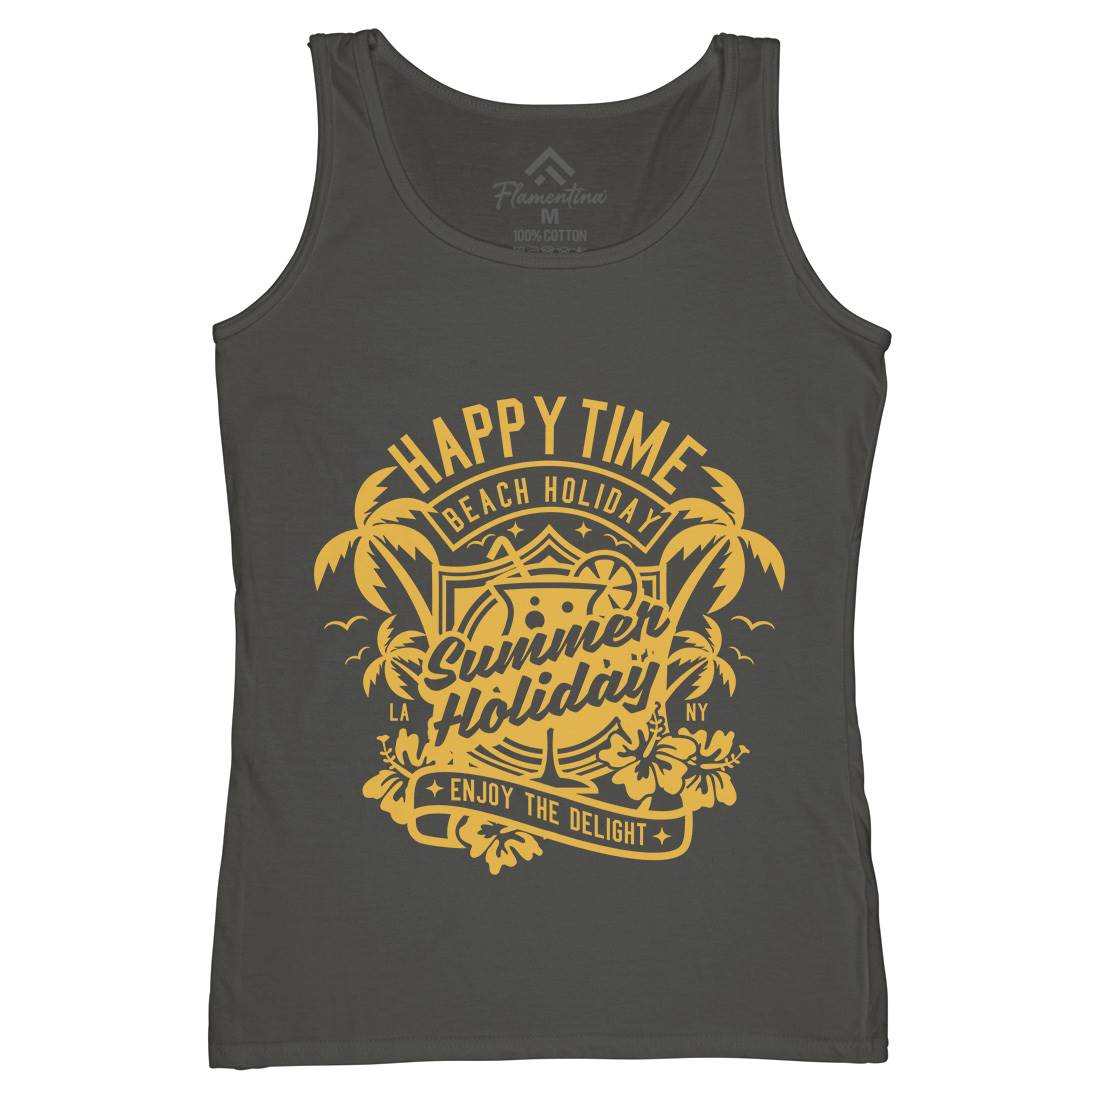 Happy Time Womens Organic Tank Top Vest Surf A238